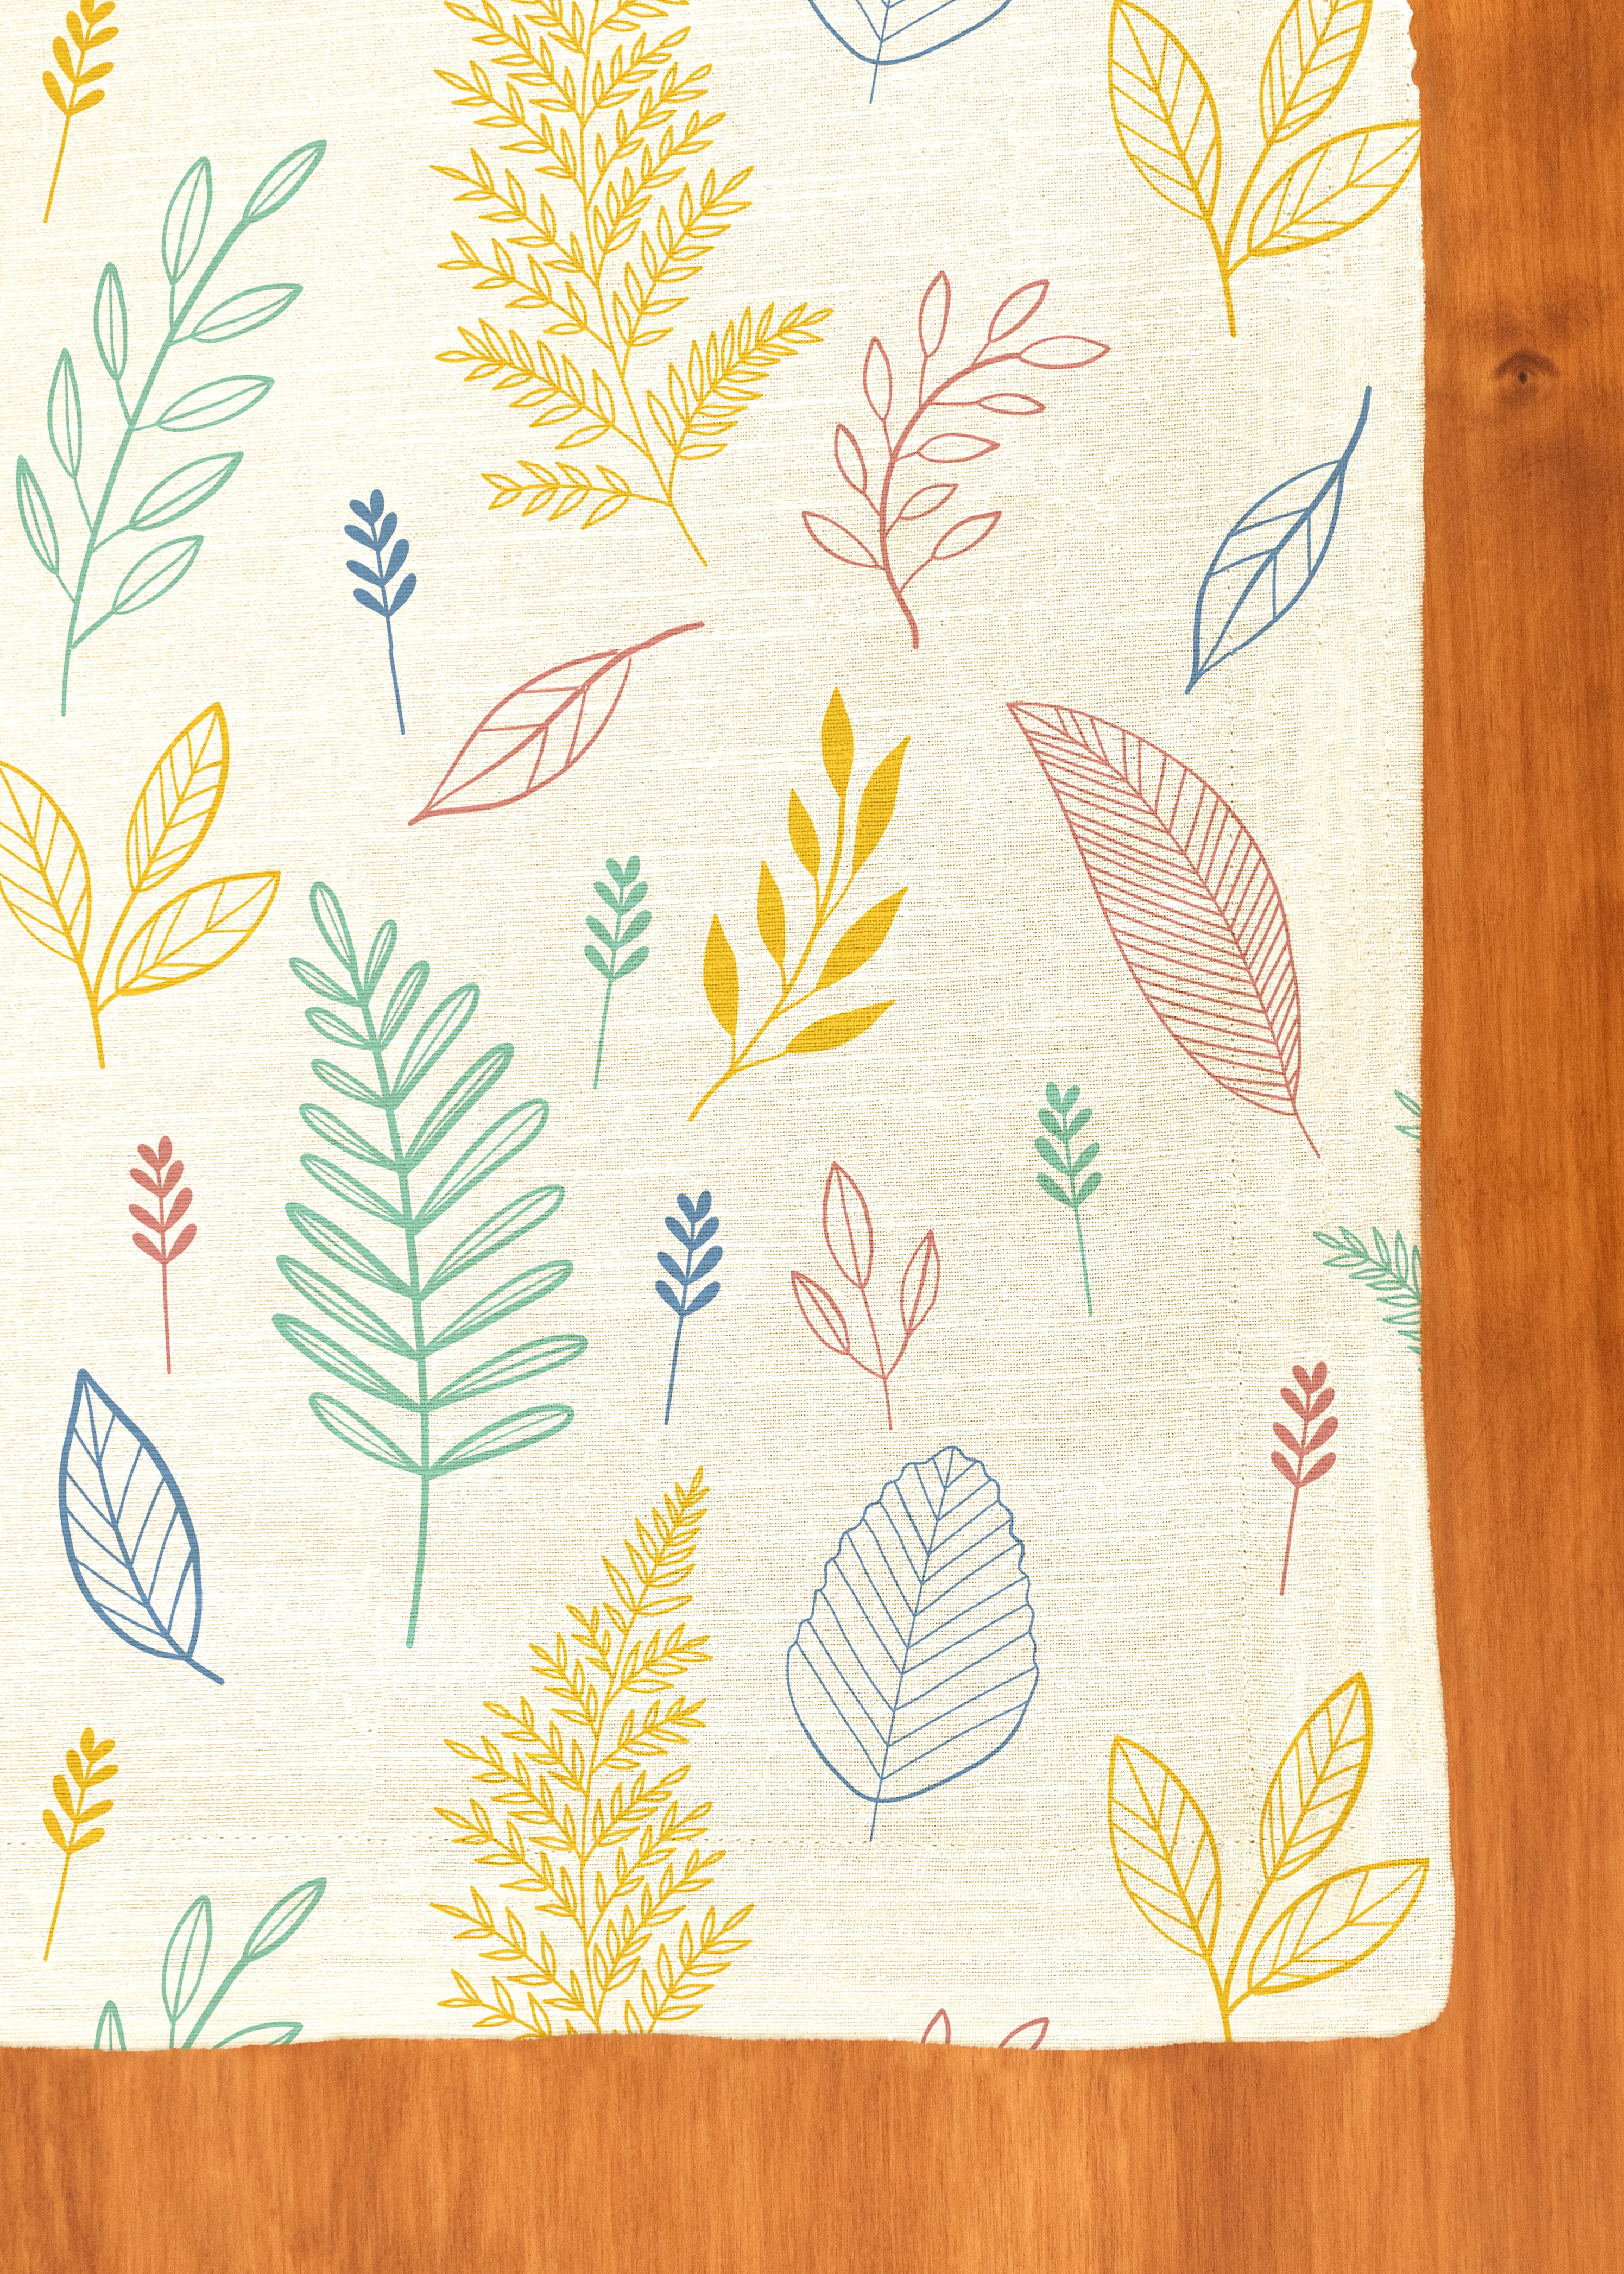 Rustling Leaves in Many hues Printed Cotton Table Cloth - Multicolor